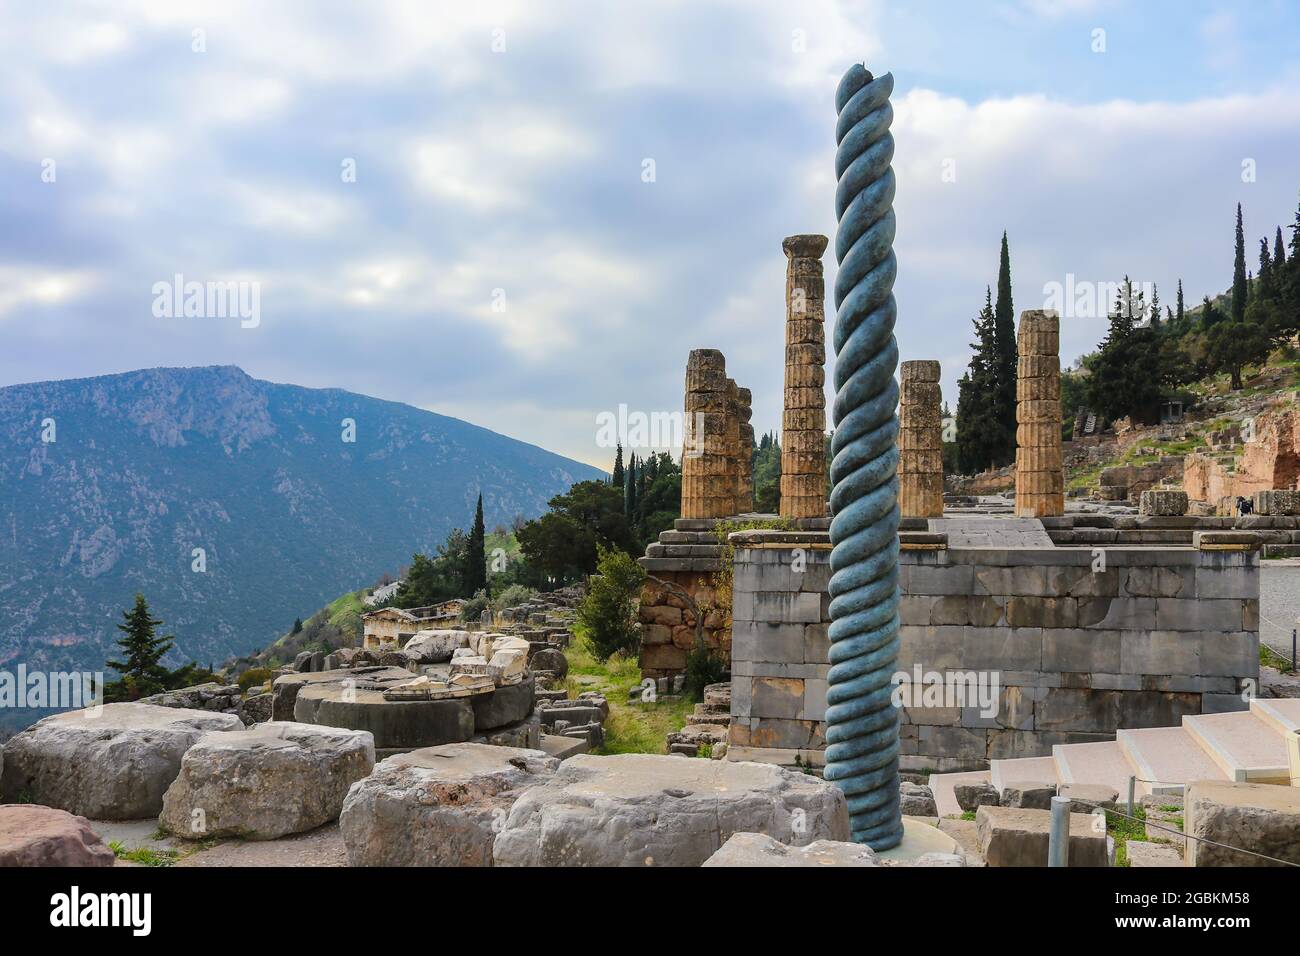 View of mountainside site of ancient Delphi Greece with twisted column in front of Temple of Apollo with a treasury down the hill and another mountain Stock Photo